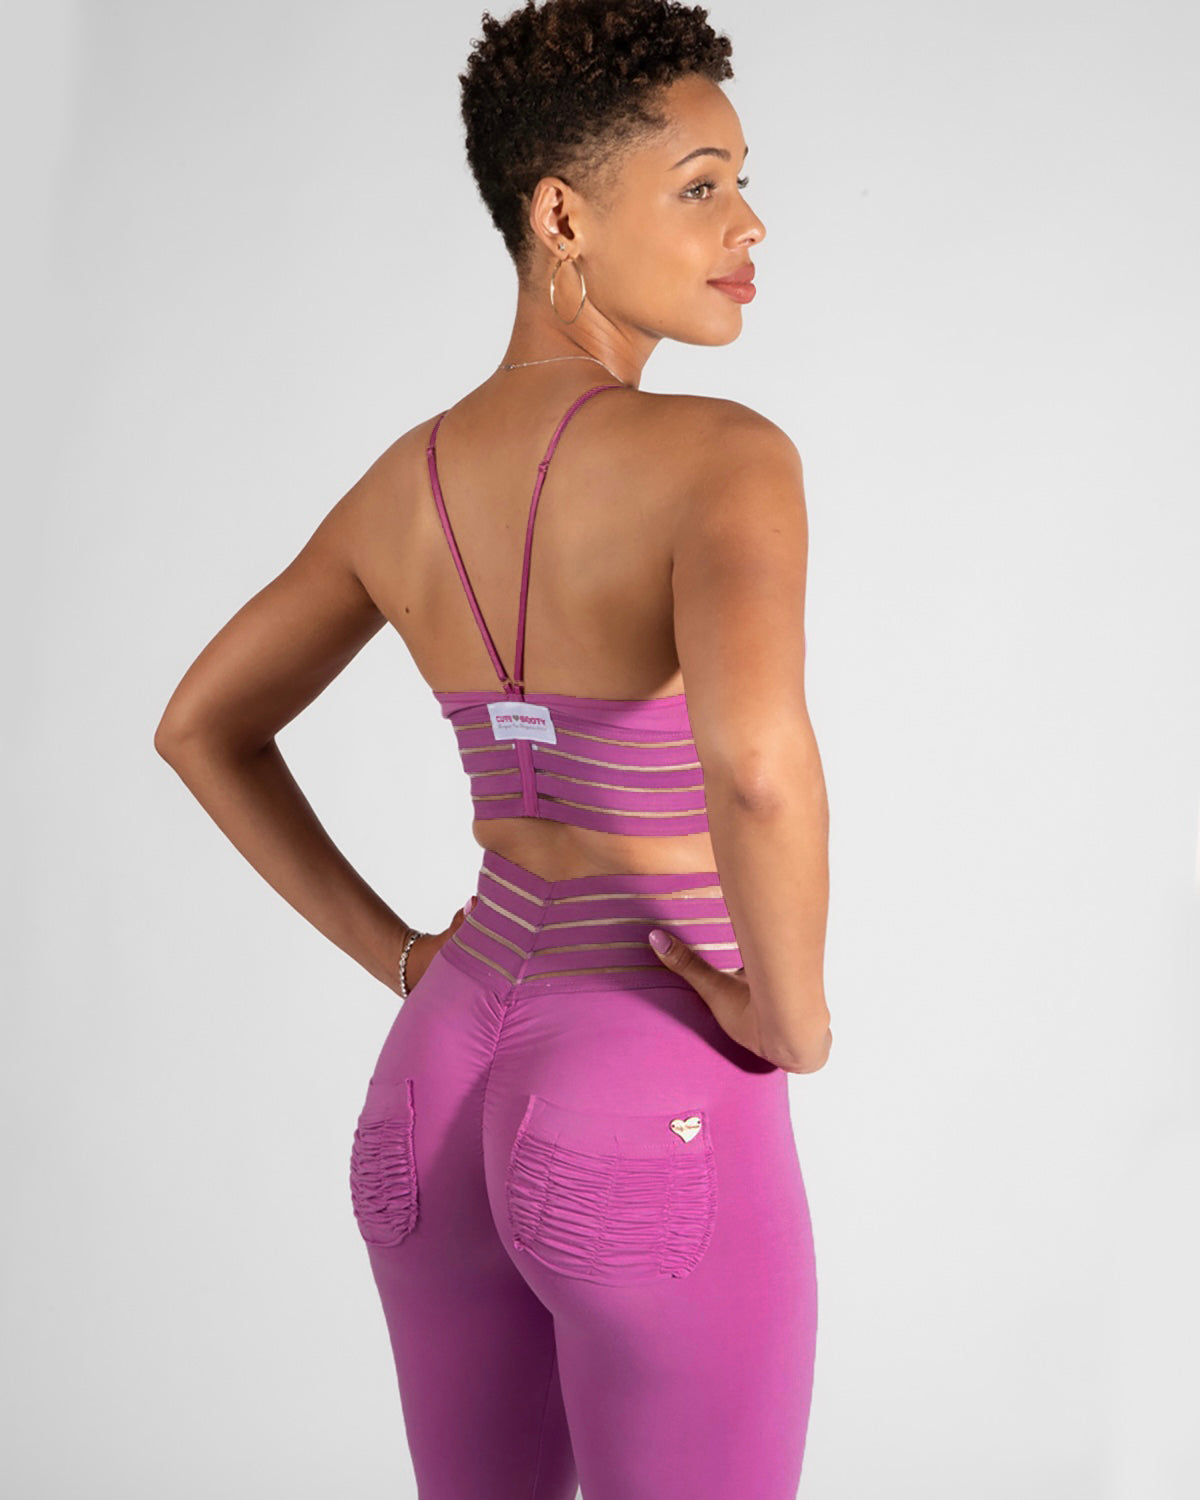 *Color Me Bad* (Silhouette Lifestyle Cute Booty) by Cute Booty Lounge